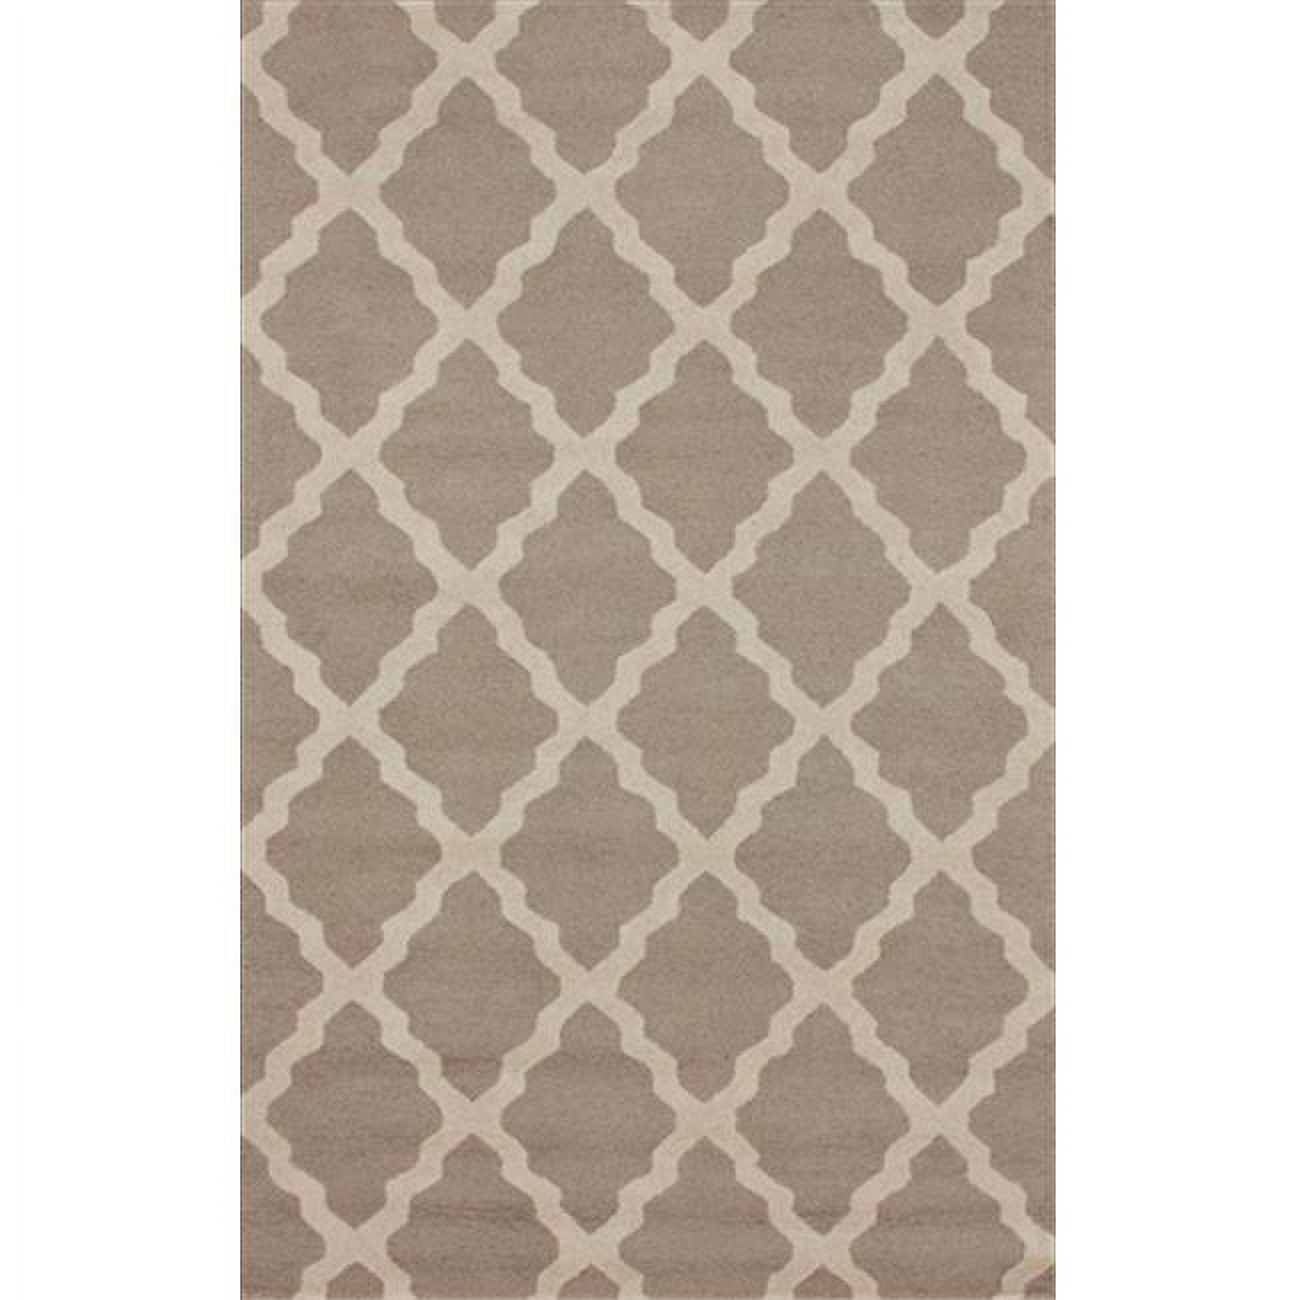 NuLoom MTVS27A-606R 6 ft. x 6 ft. Moroccan Trellis Tan Hand Hooked